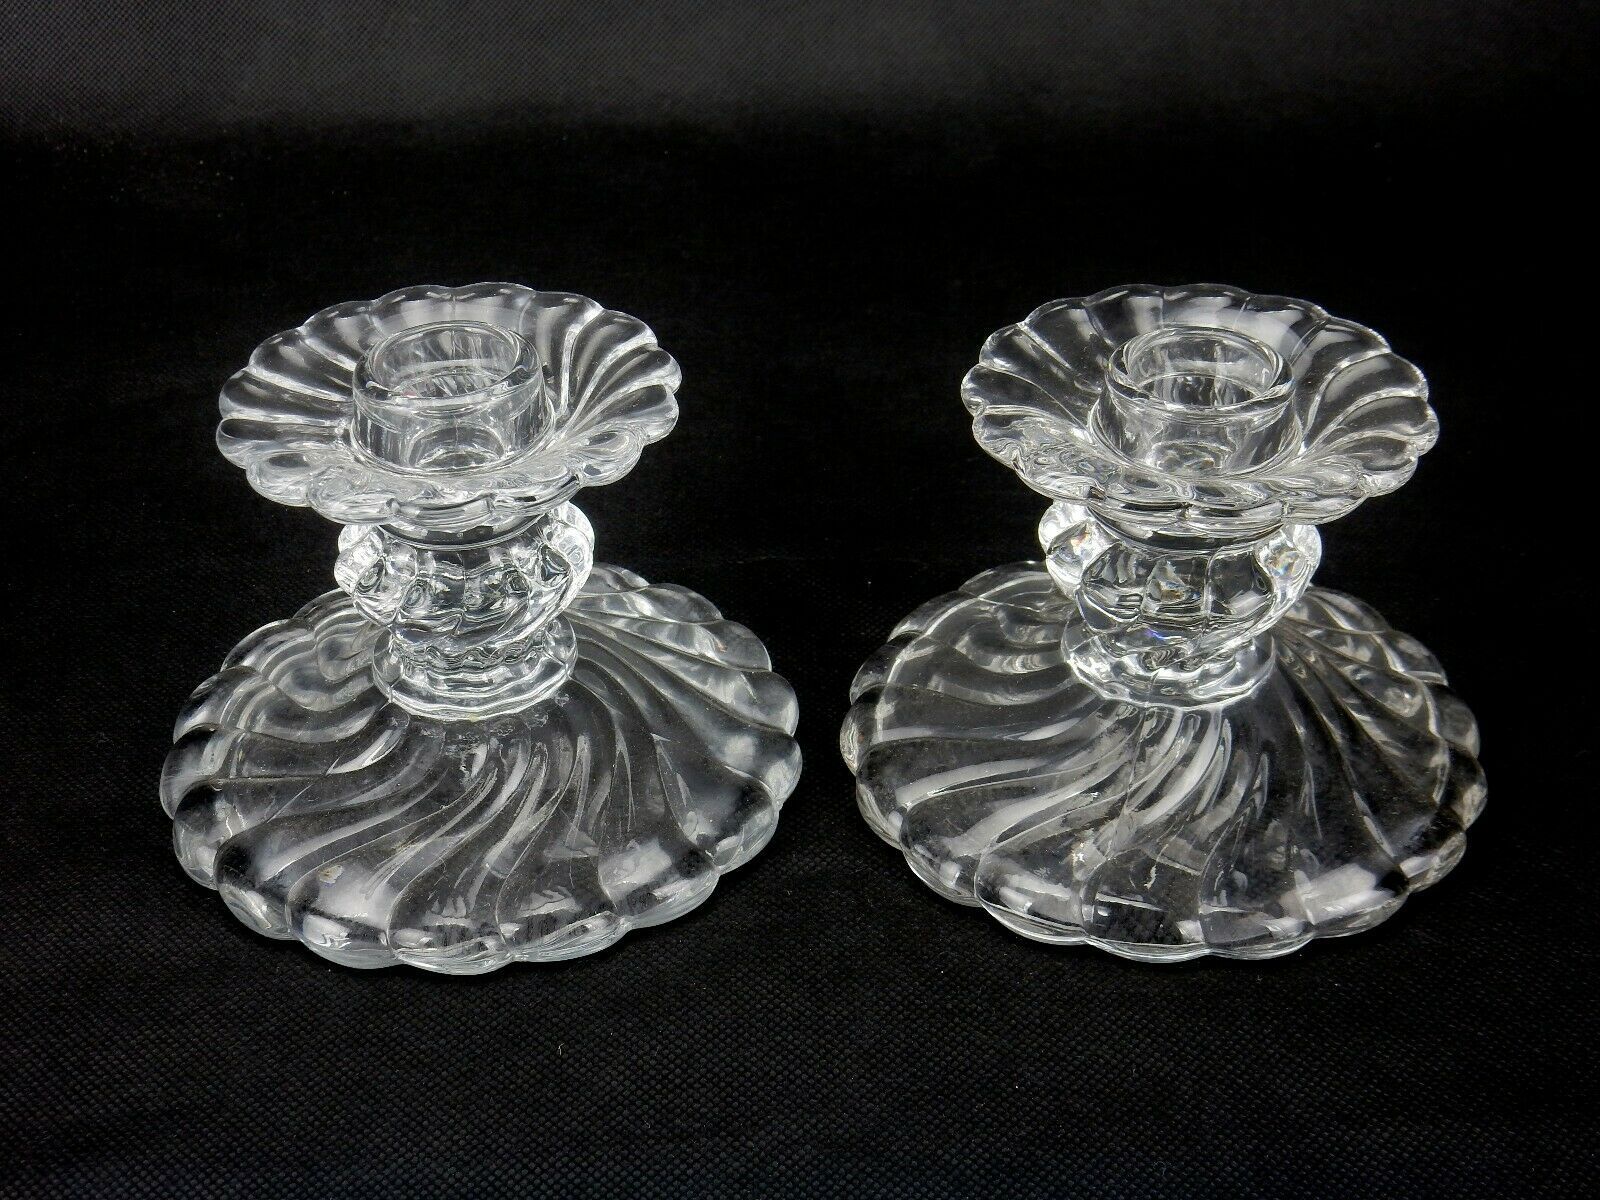 Primary image for Vintage Fostoria Candle Holders, EAPG , Swirl Glass Pair of Candle Holders 3"